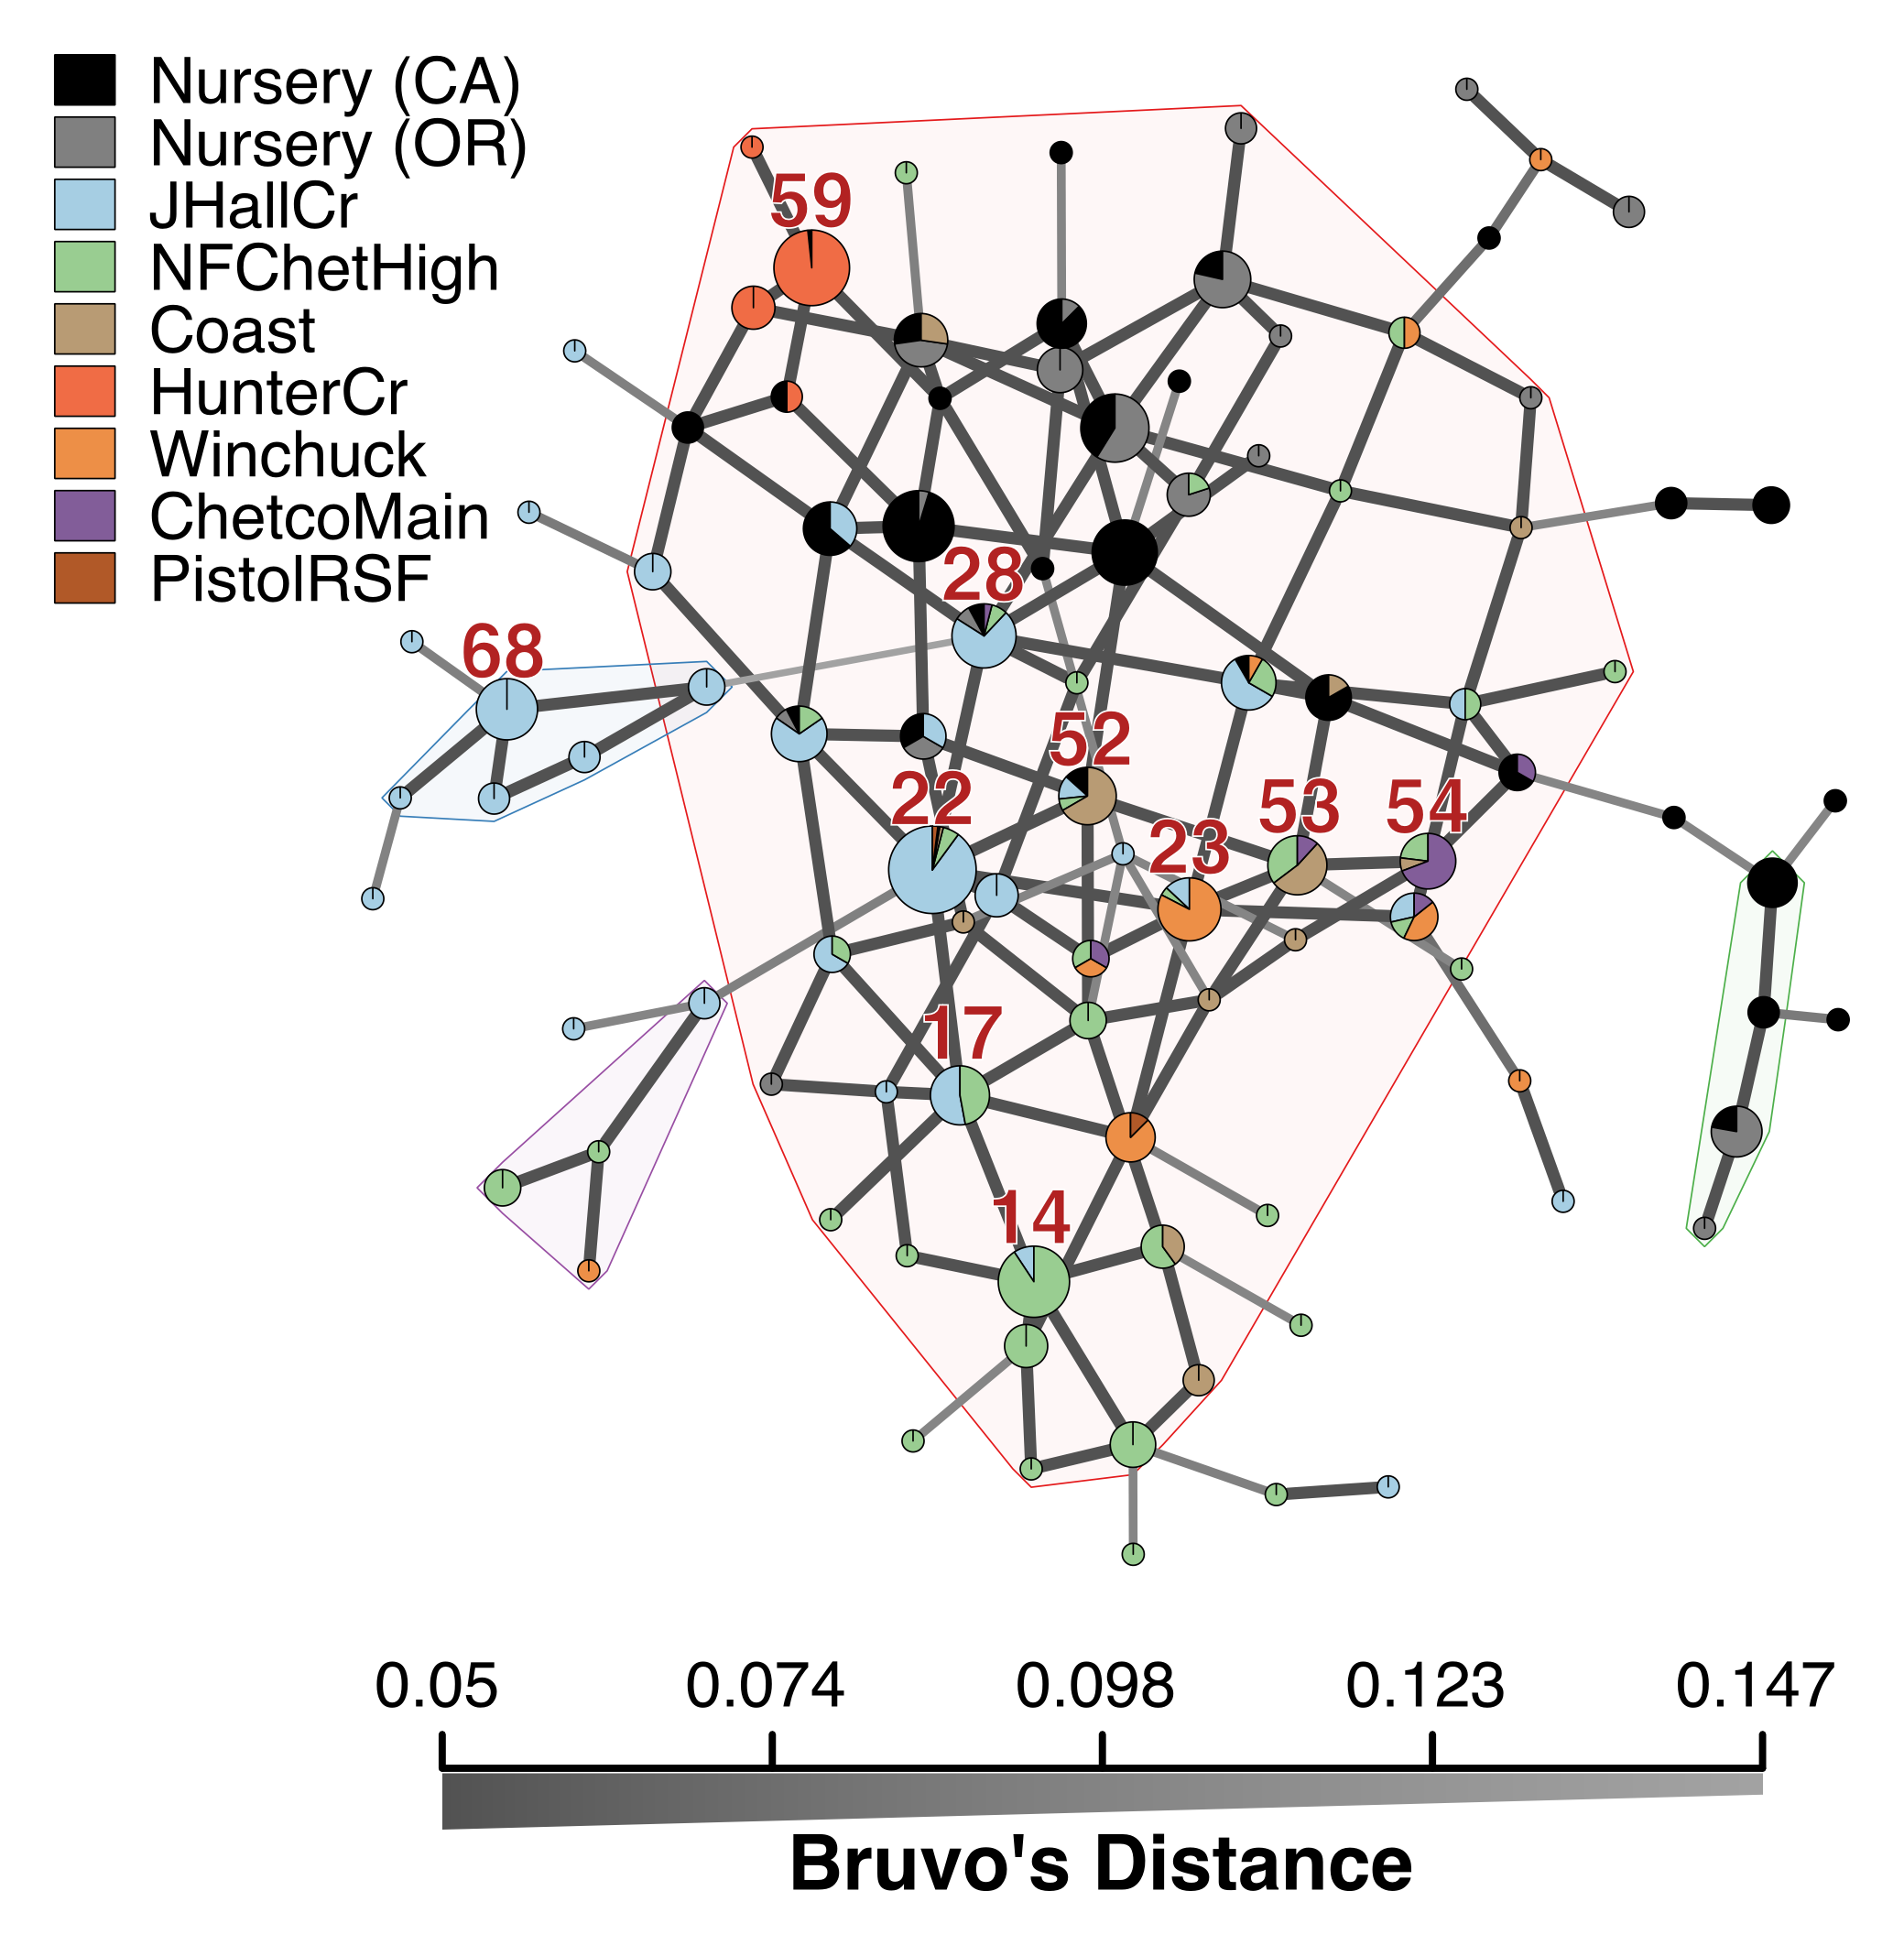 Minimum spanning network based on Bruvo's genetic distance for
microsatellite markers for *P. ramorum* populations. Nodes (circles)
represent individual multilocus genotypes. The 10 most abundant forest
genotypes are labeled with their MLG designation. Node colors represent
population membership proportional to the pie size. Node sizes are
relatively scaled to *log~1.75~n,* where *n* is the number of samples in
the nodes to avoid node overlap. Edges (lines) represent minimum genetic
distance between individuals determined by Prim's algorithm. Nodes that
are more closely related will have darker and thicker edges whereas
nodes more distantly related will have lighter and thinner edges or no
edge at all. Reticulation was introduced by finding exact ties in
genetic distance after Prim's algorithm was run. Subgroups of &gt;3 MLGs
where all nodes are no more than one mutational step (d = 0.05) away
from its neighbors, are highlighted in arbitrary colors.